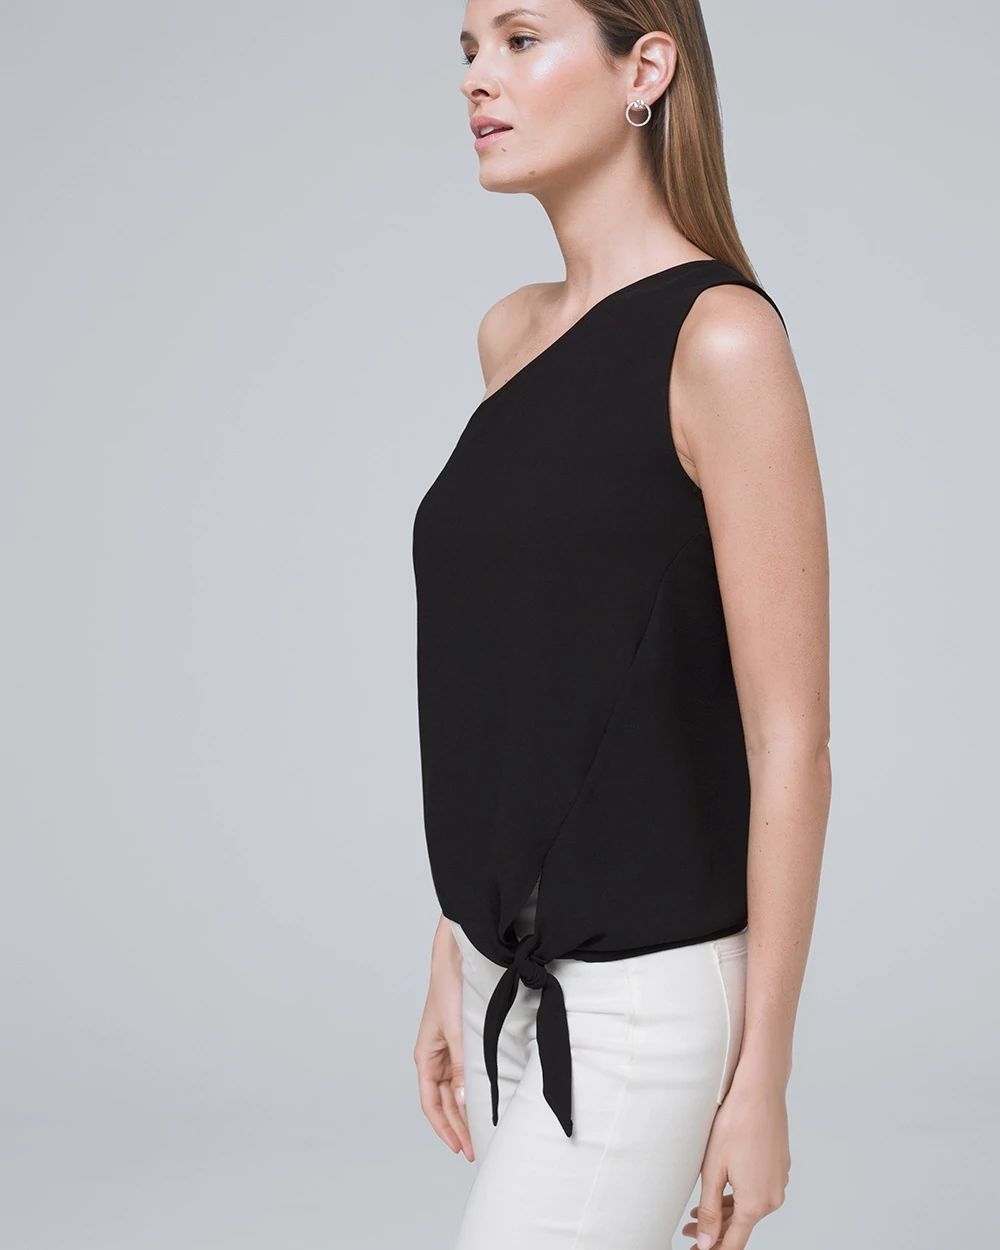 One-Shoulder Blouse with Tie Belt click to view larger image.